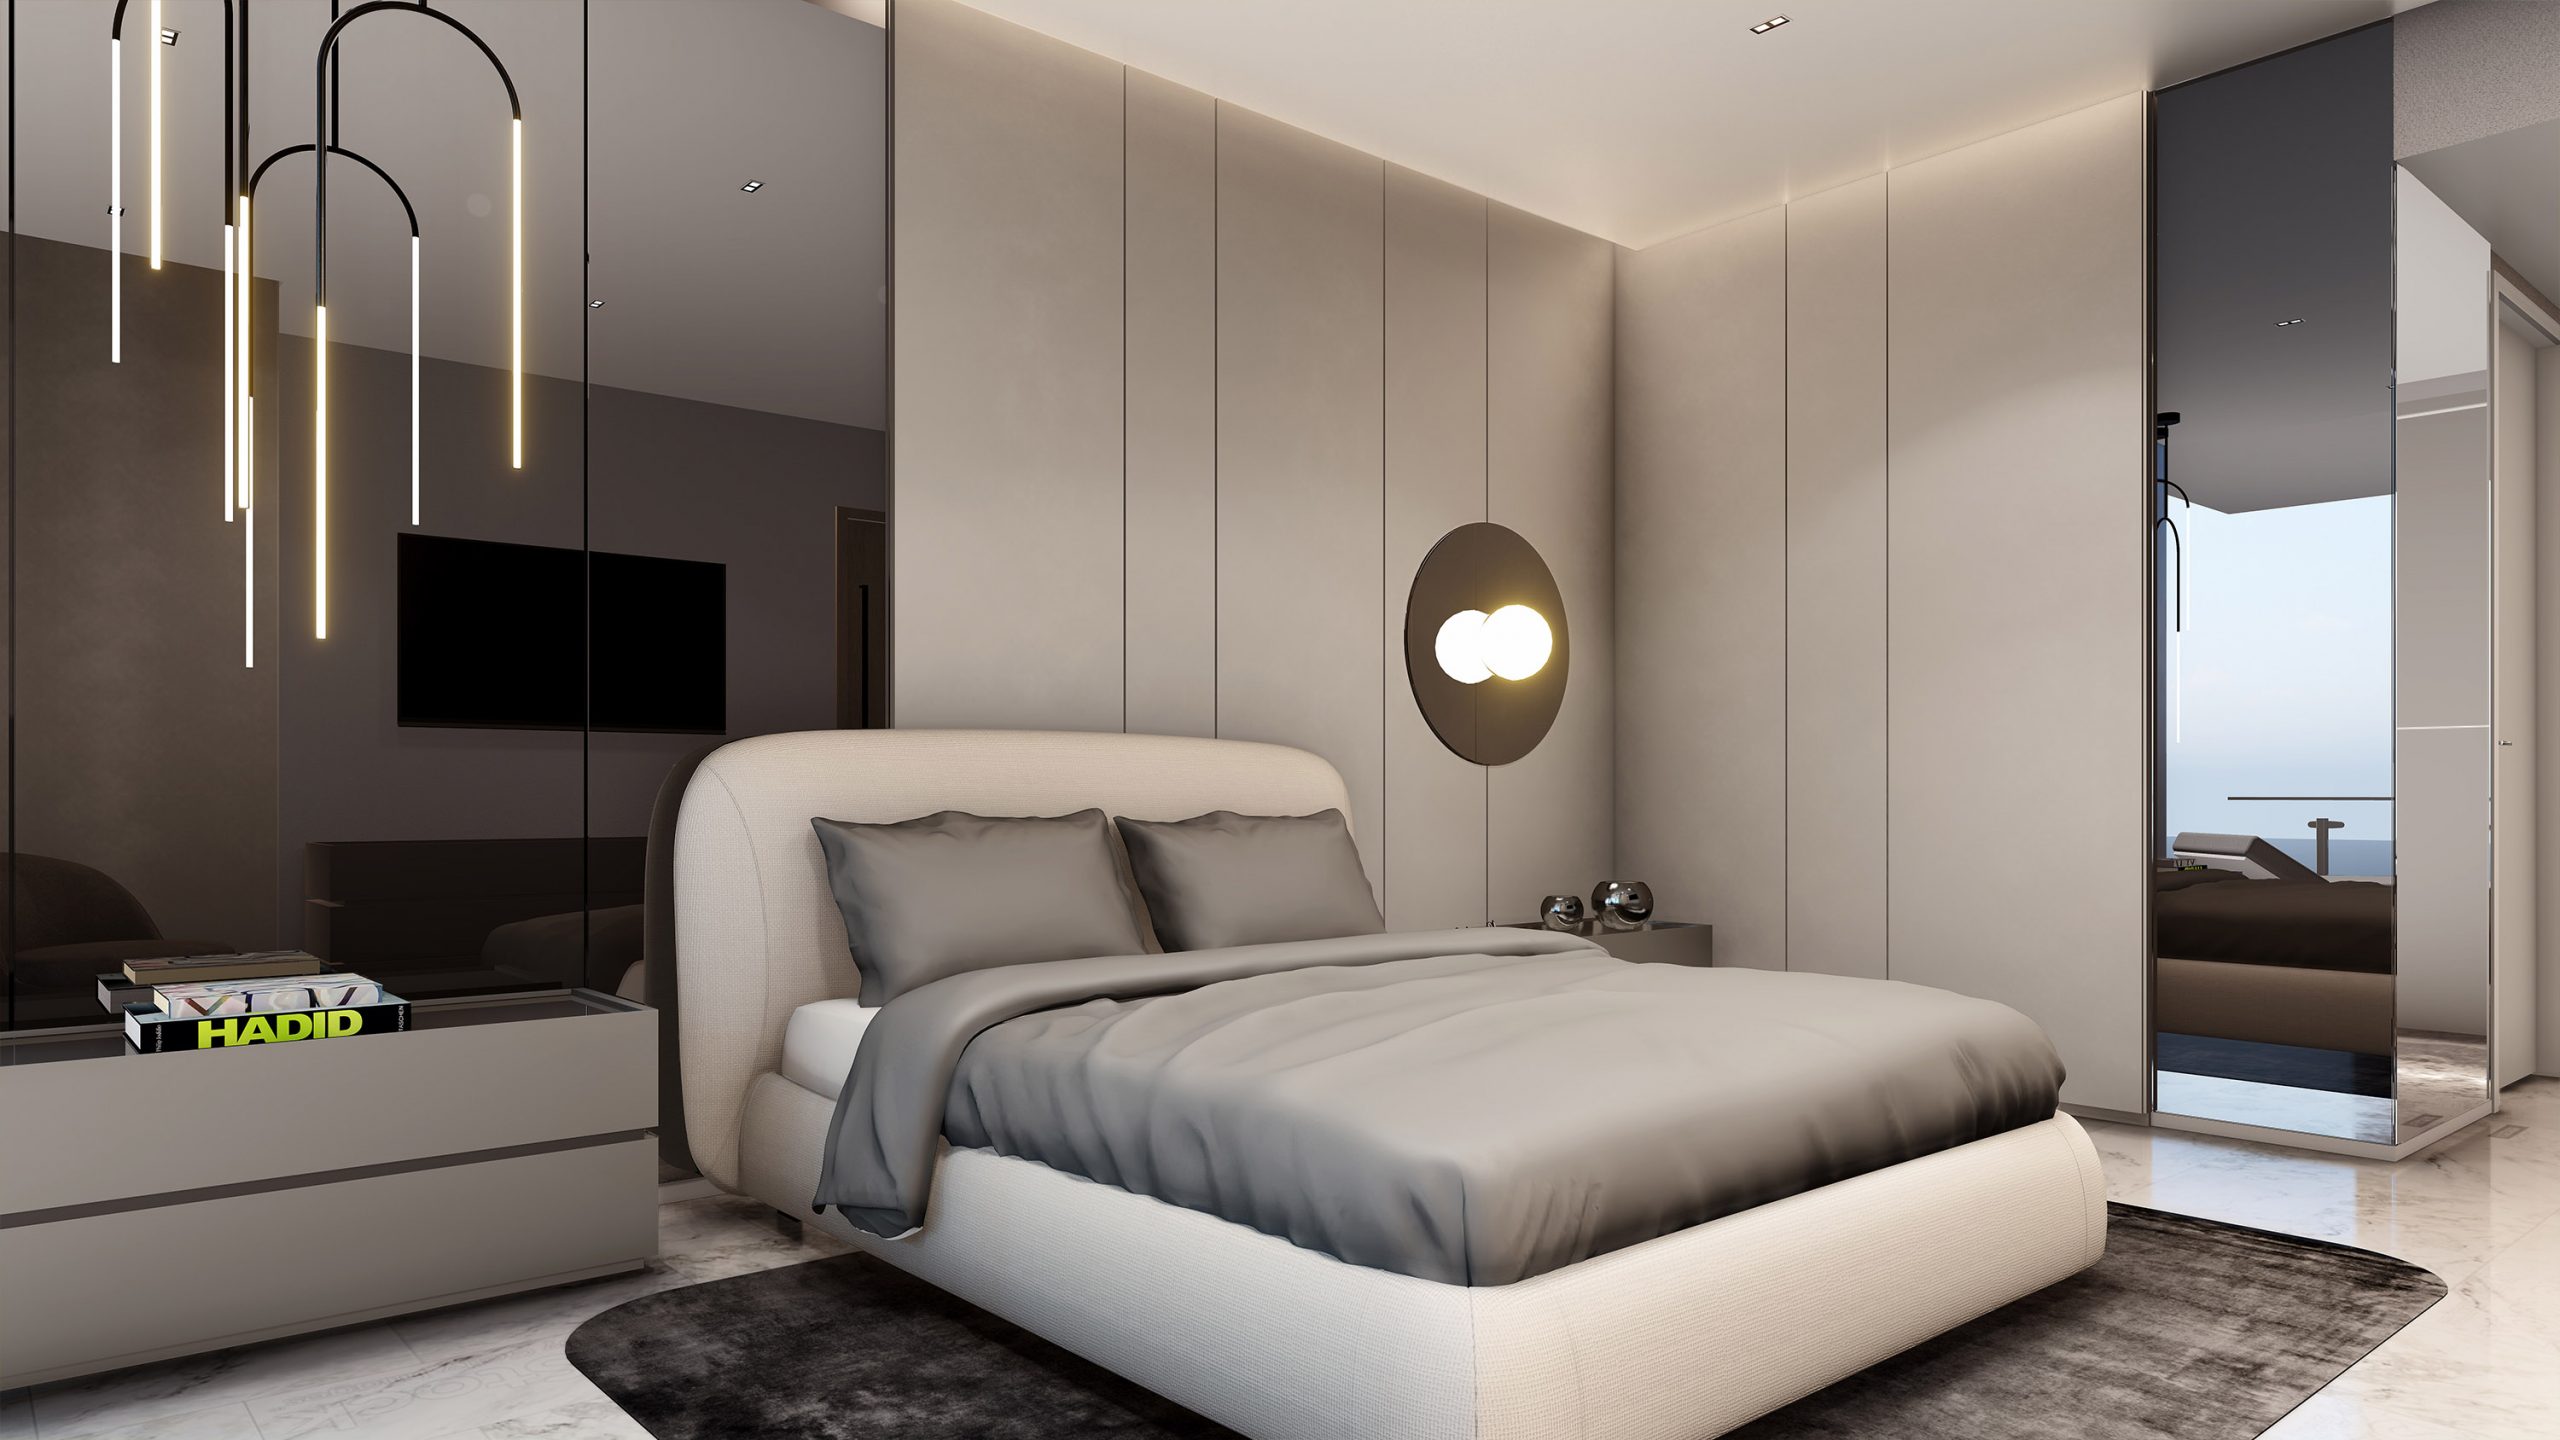 Minimalist and contemporary bedroom with neutral sand colors, smoke mirrors, dark rug with rounded corners, and sleek light fixtures.